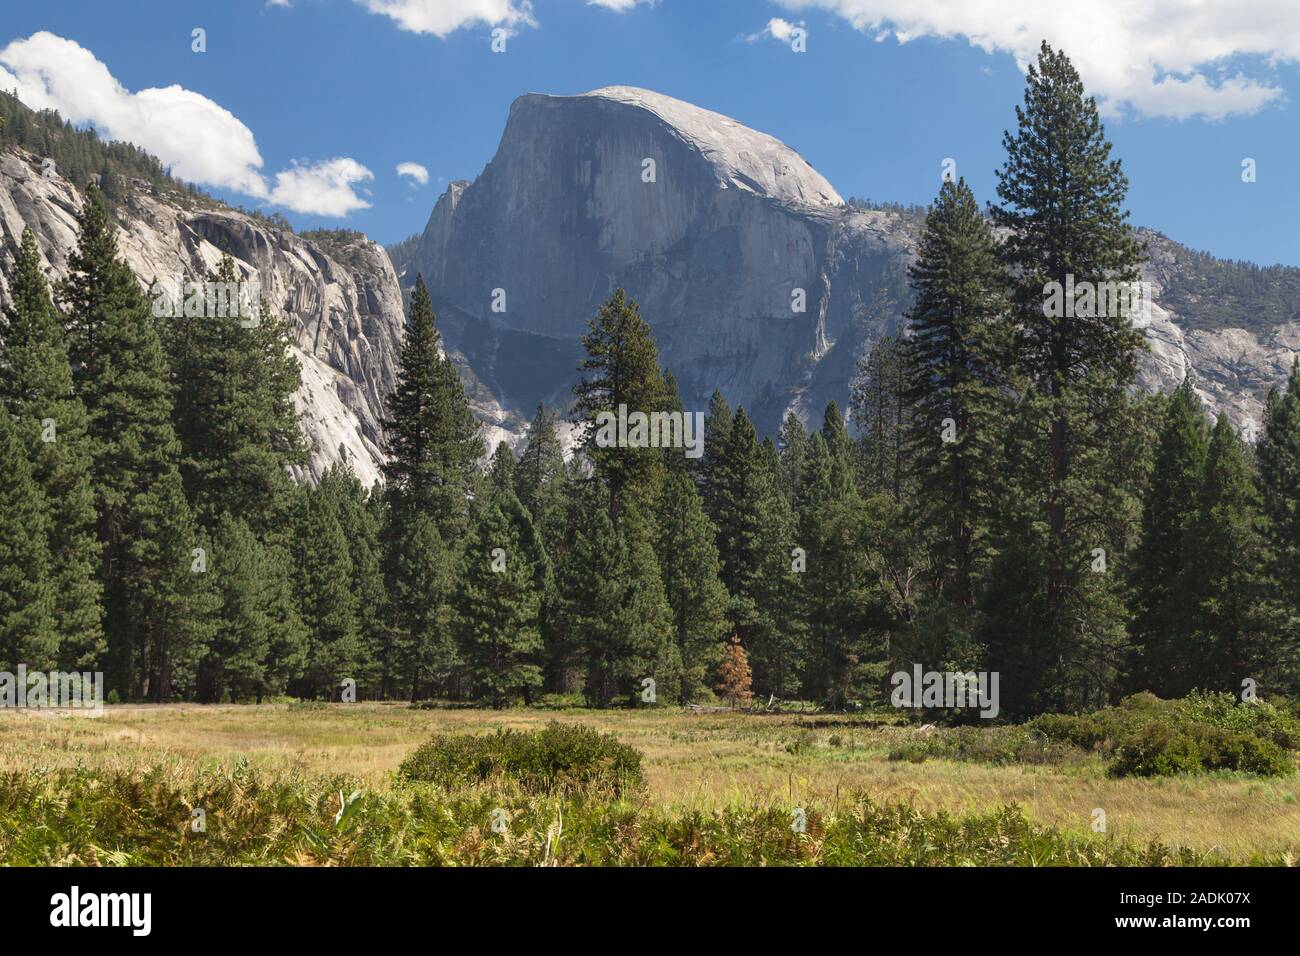 Half Dome seen from the valley floor, Yosemite National Park, California, USA. Stock Photo